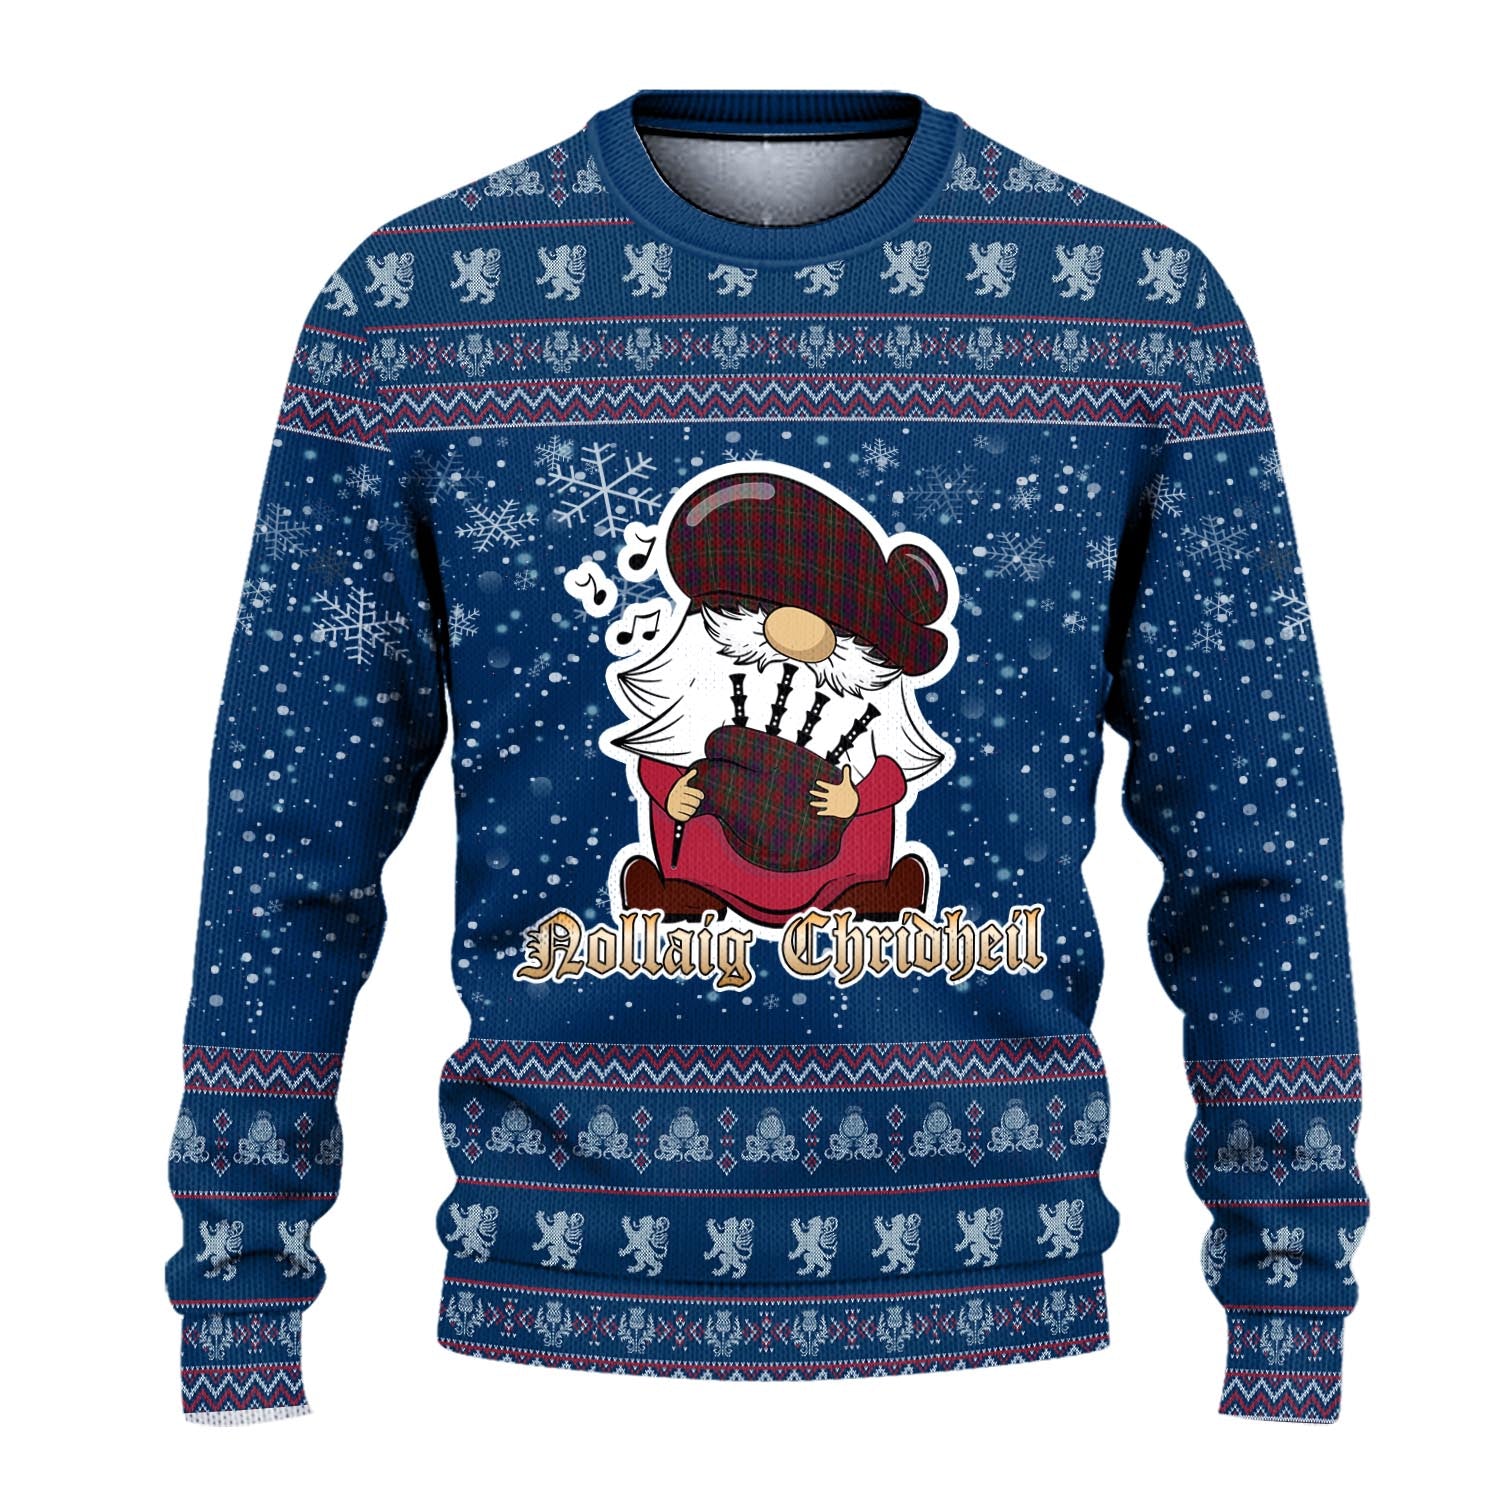 Clare County Ireland Clan Christmas Family Knitted Sweater with Funny Gnome Playing Bagpipes - Tartanvibesclothing